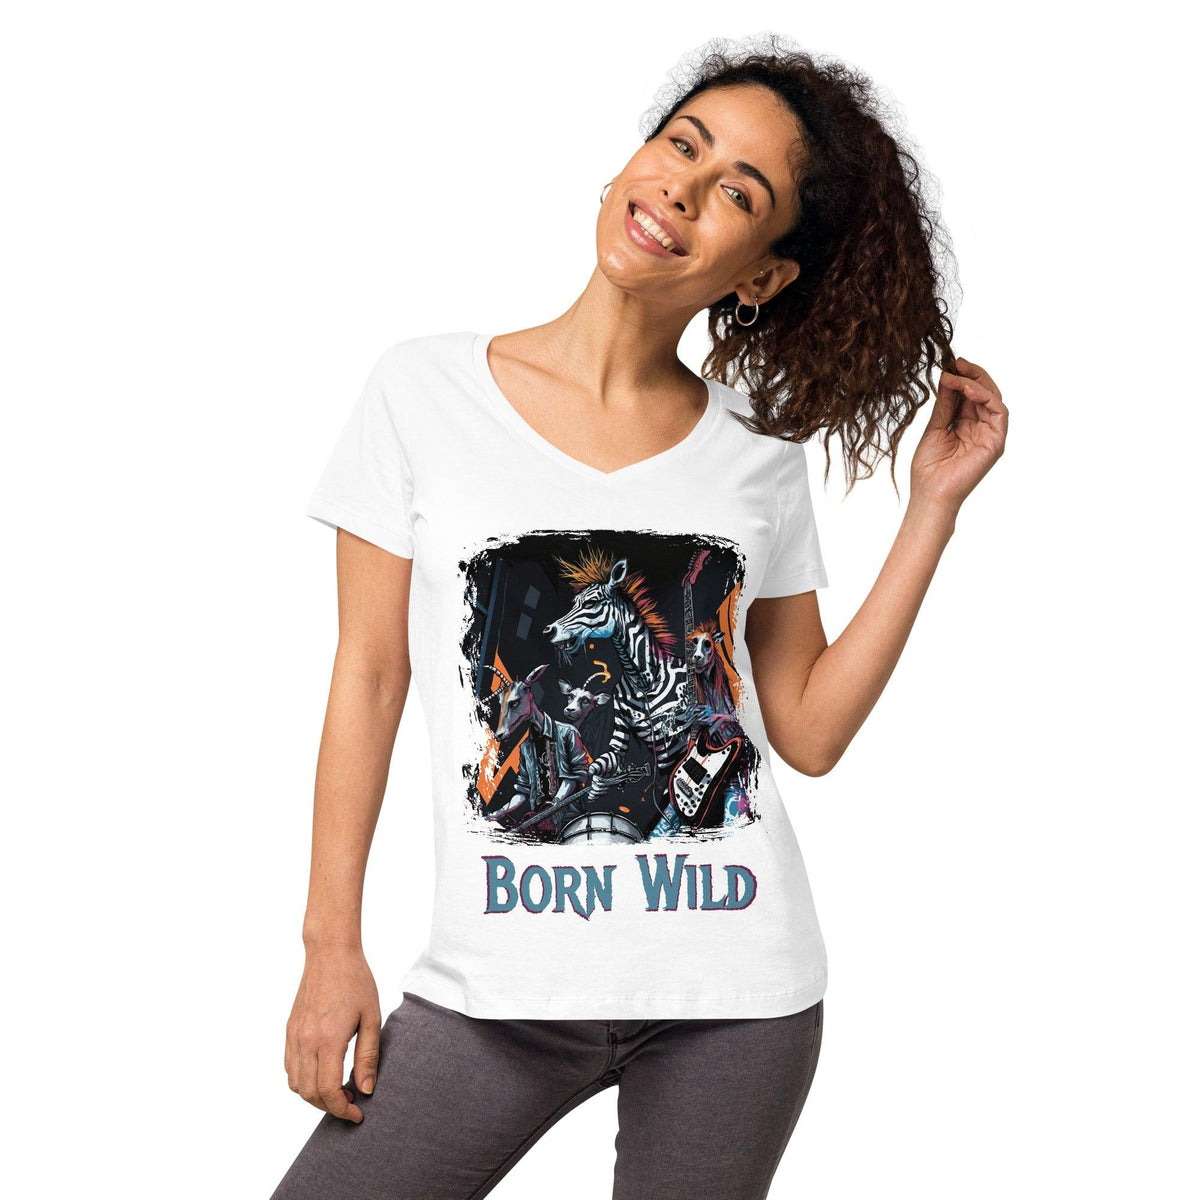 Born Wild Women’s Fitted V-neck T-shirt - Beyond T-shirts